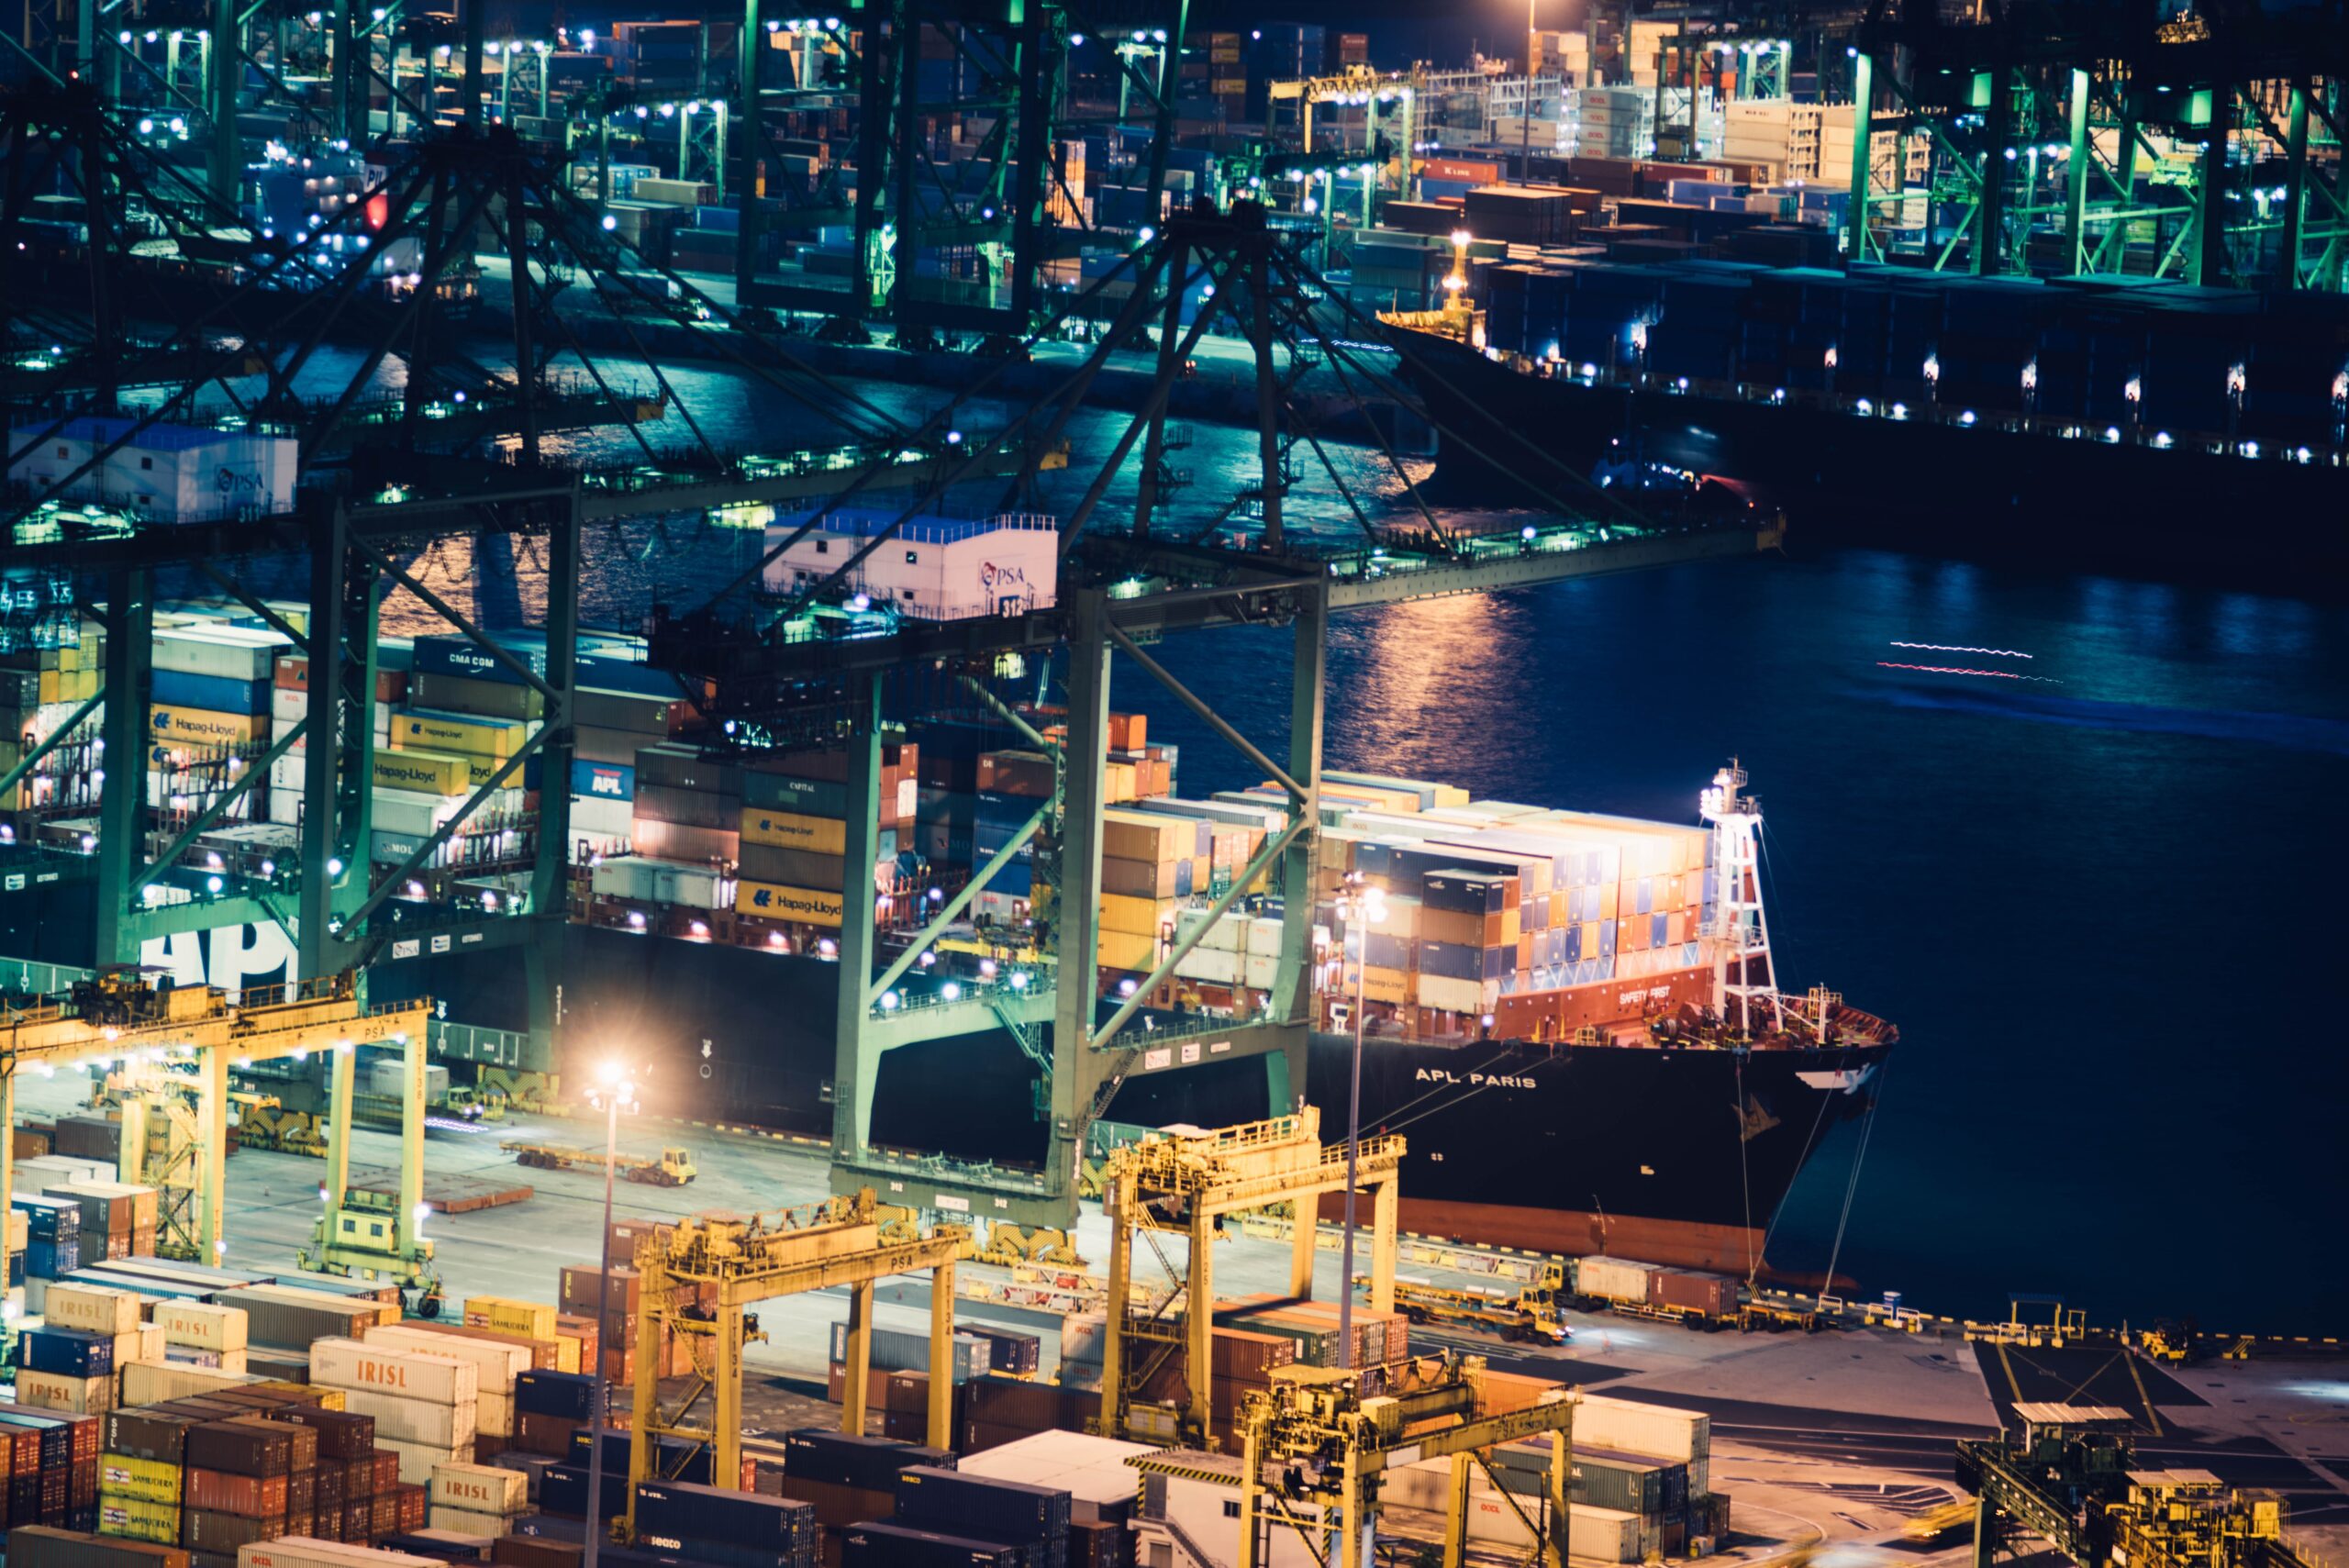 What cybersecurity issues are keeping shipping up at night?